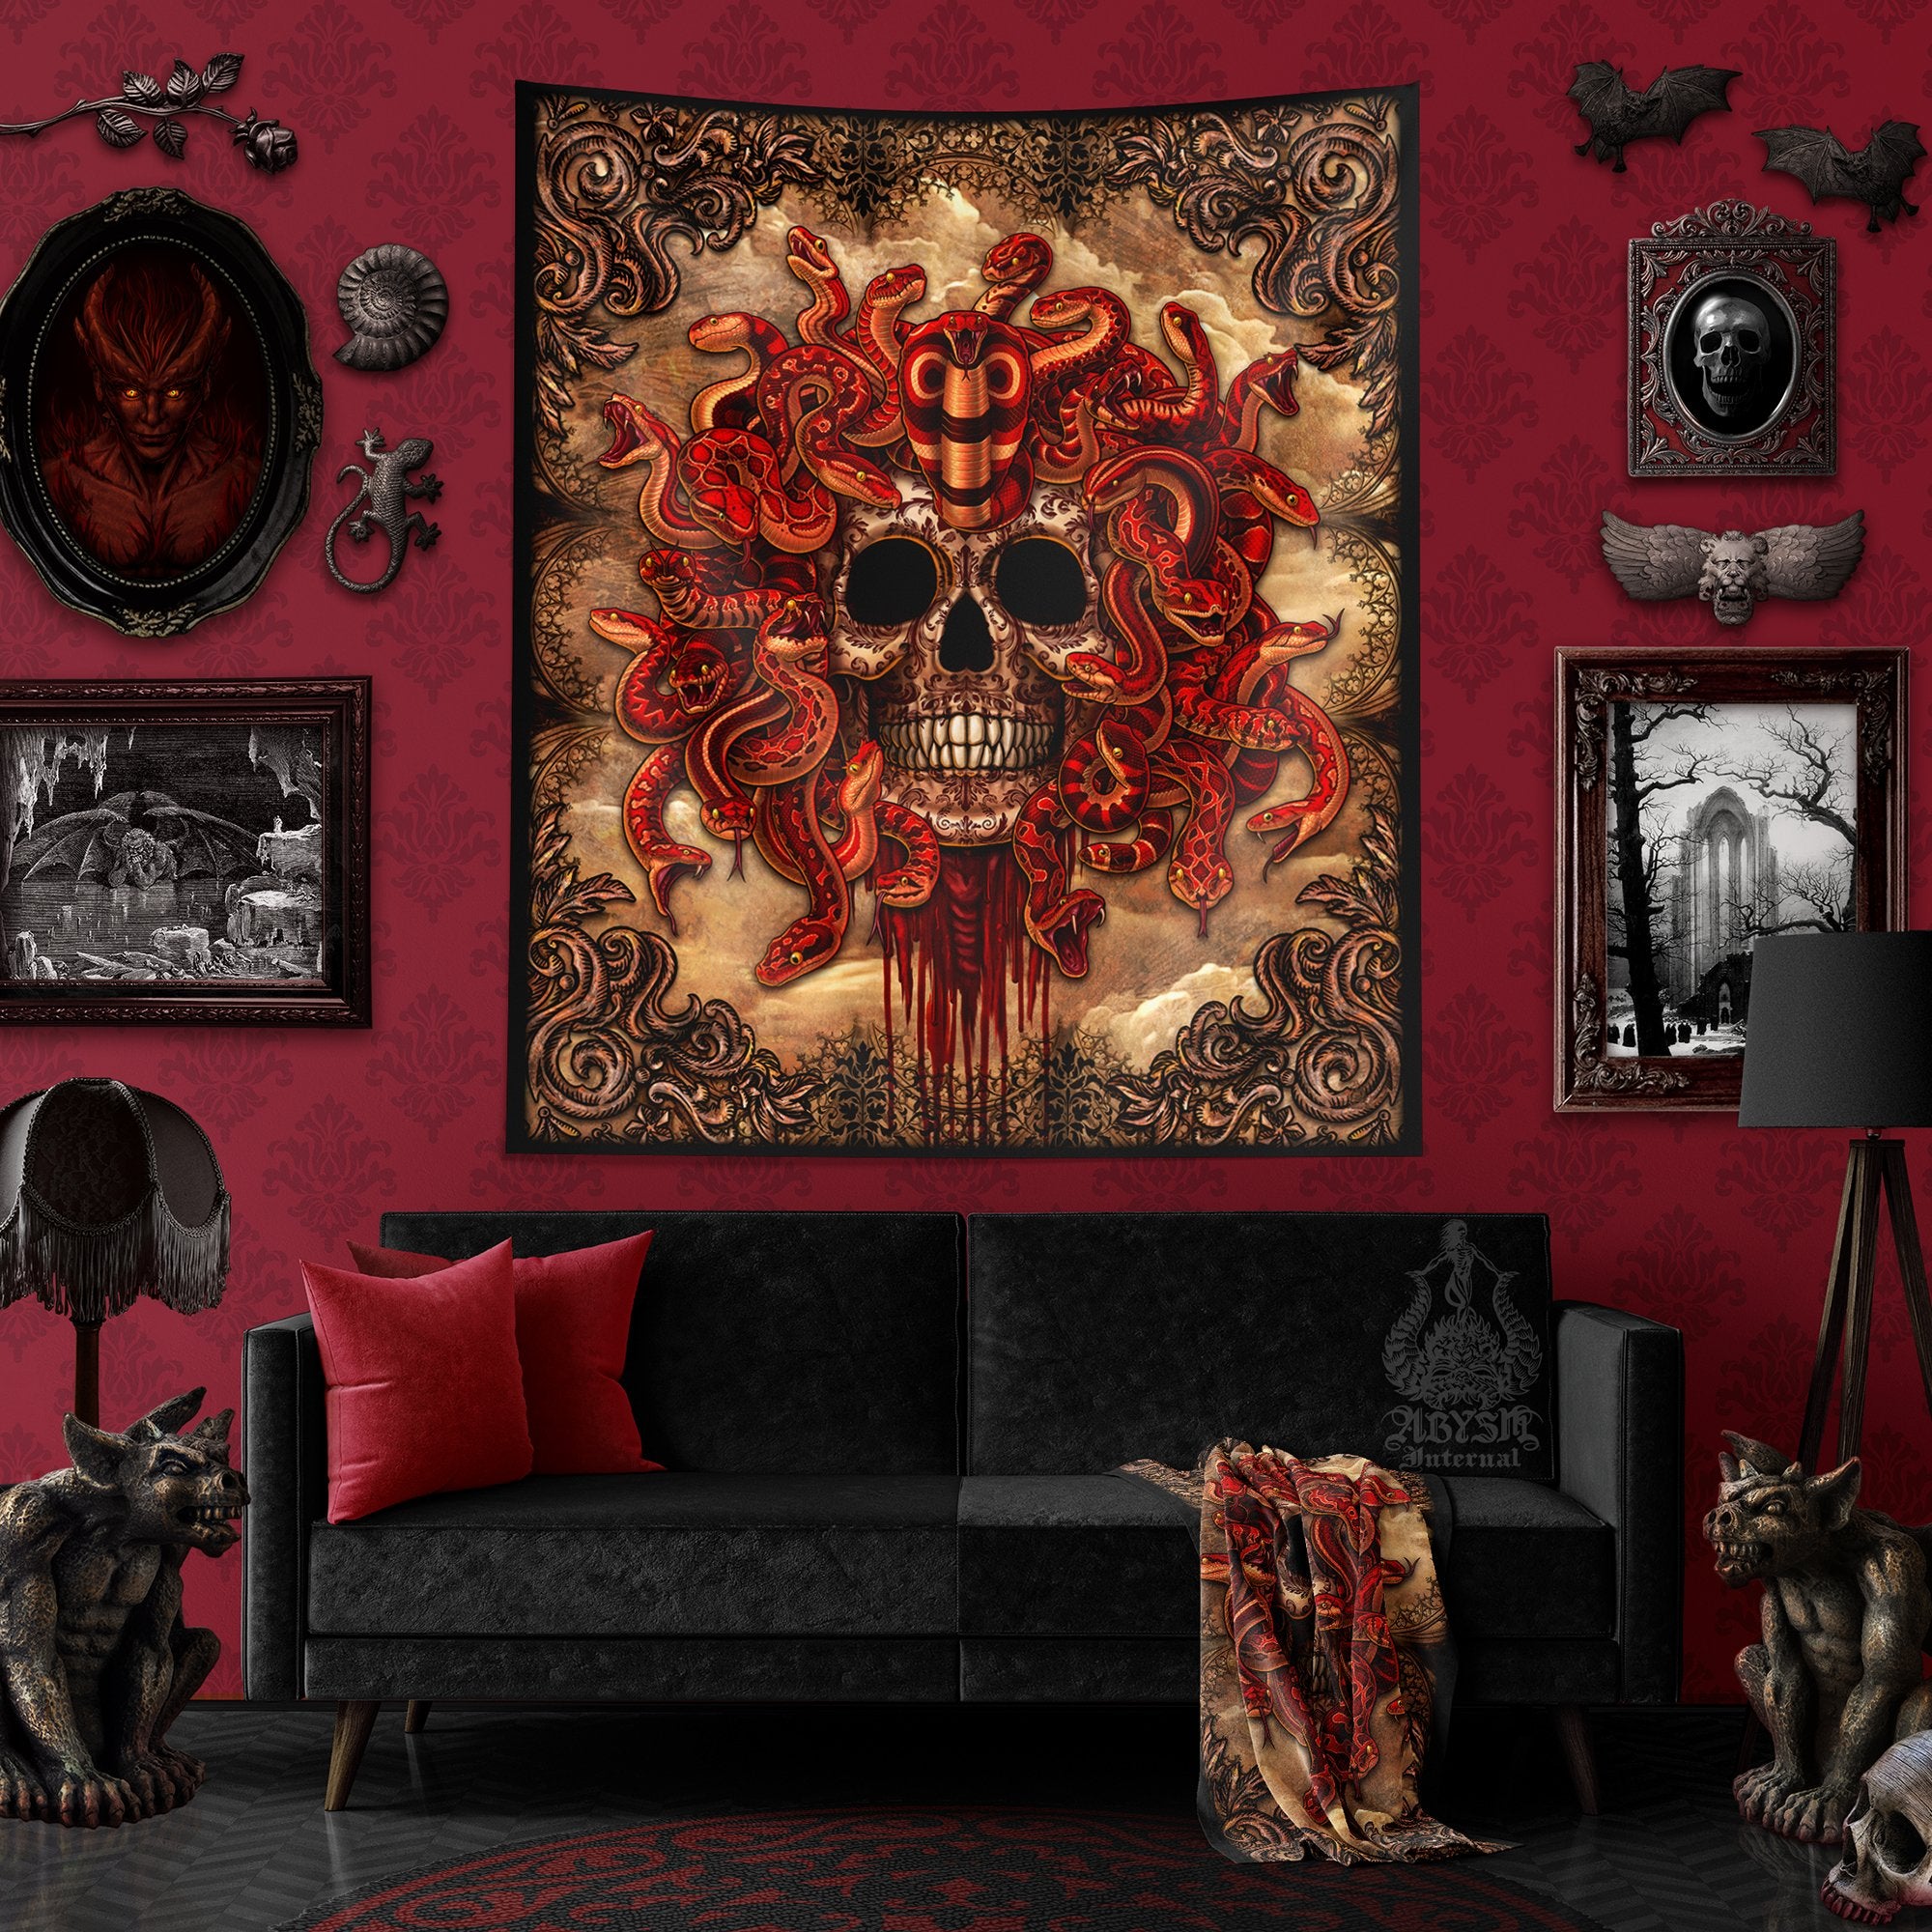 Goth Tapestry, Medusa Skull Wall Hanging, Gothic Home Decor, Vertical Art Print - Horror Beige & Red Snakes, 4 Faces - Abysm Internal